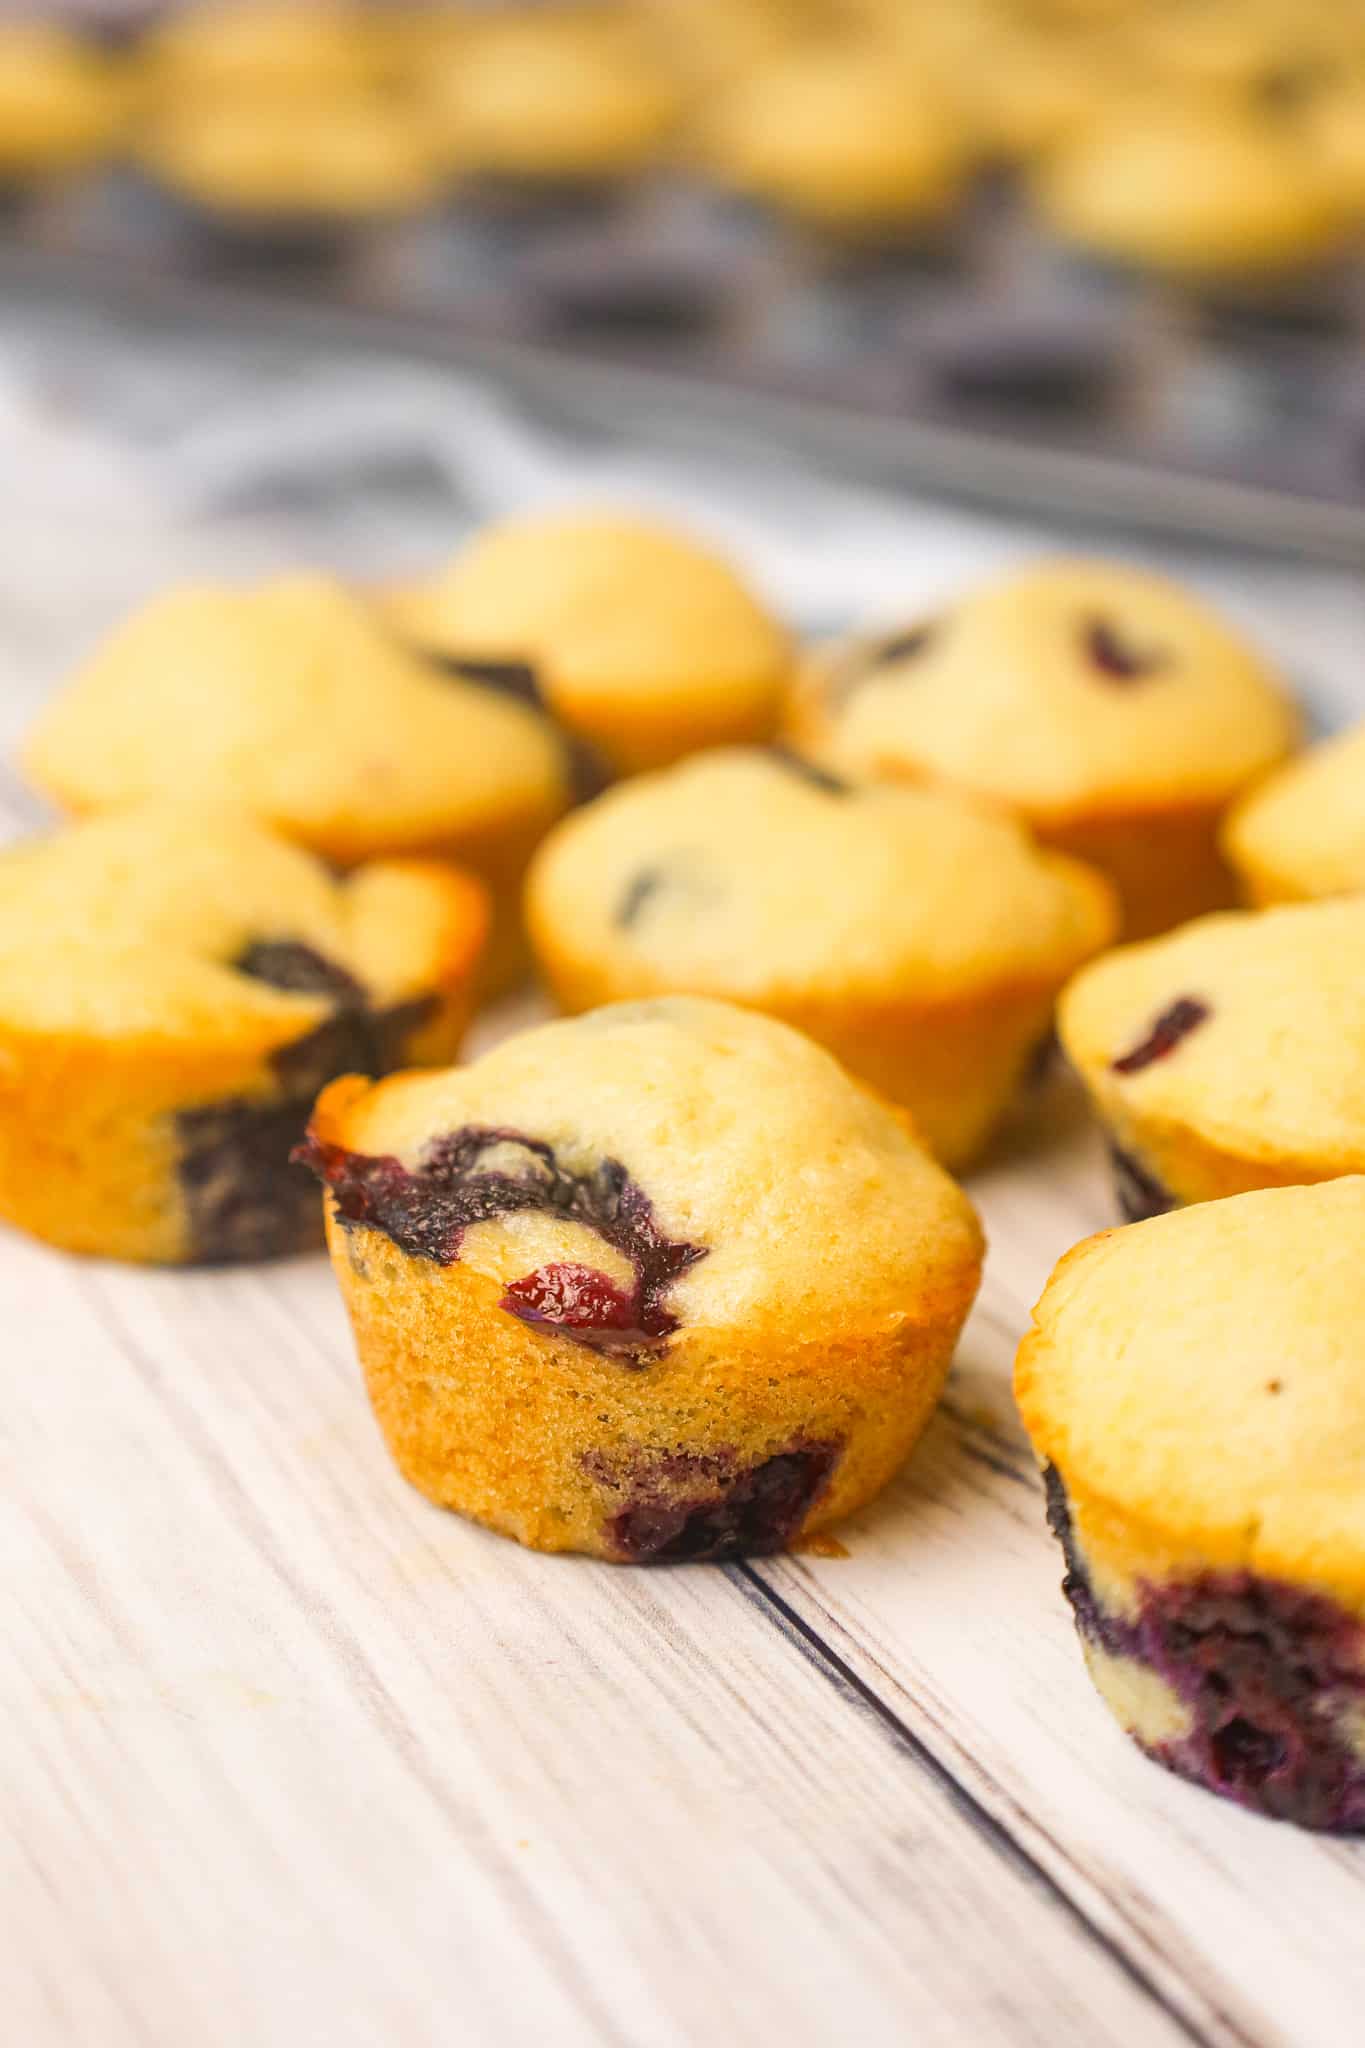 Mini Blueberry Muffins are tasty bite sized snacks loaded with fresh blueberries.